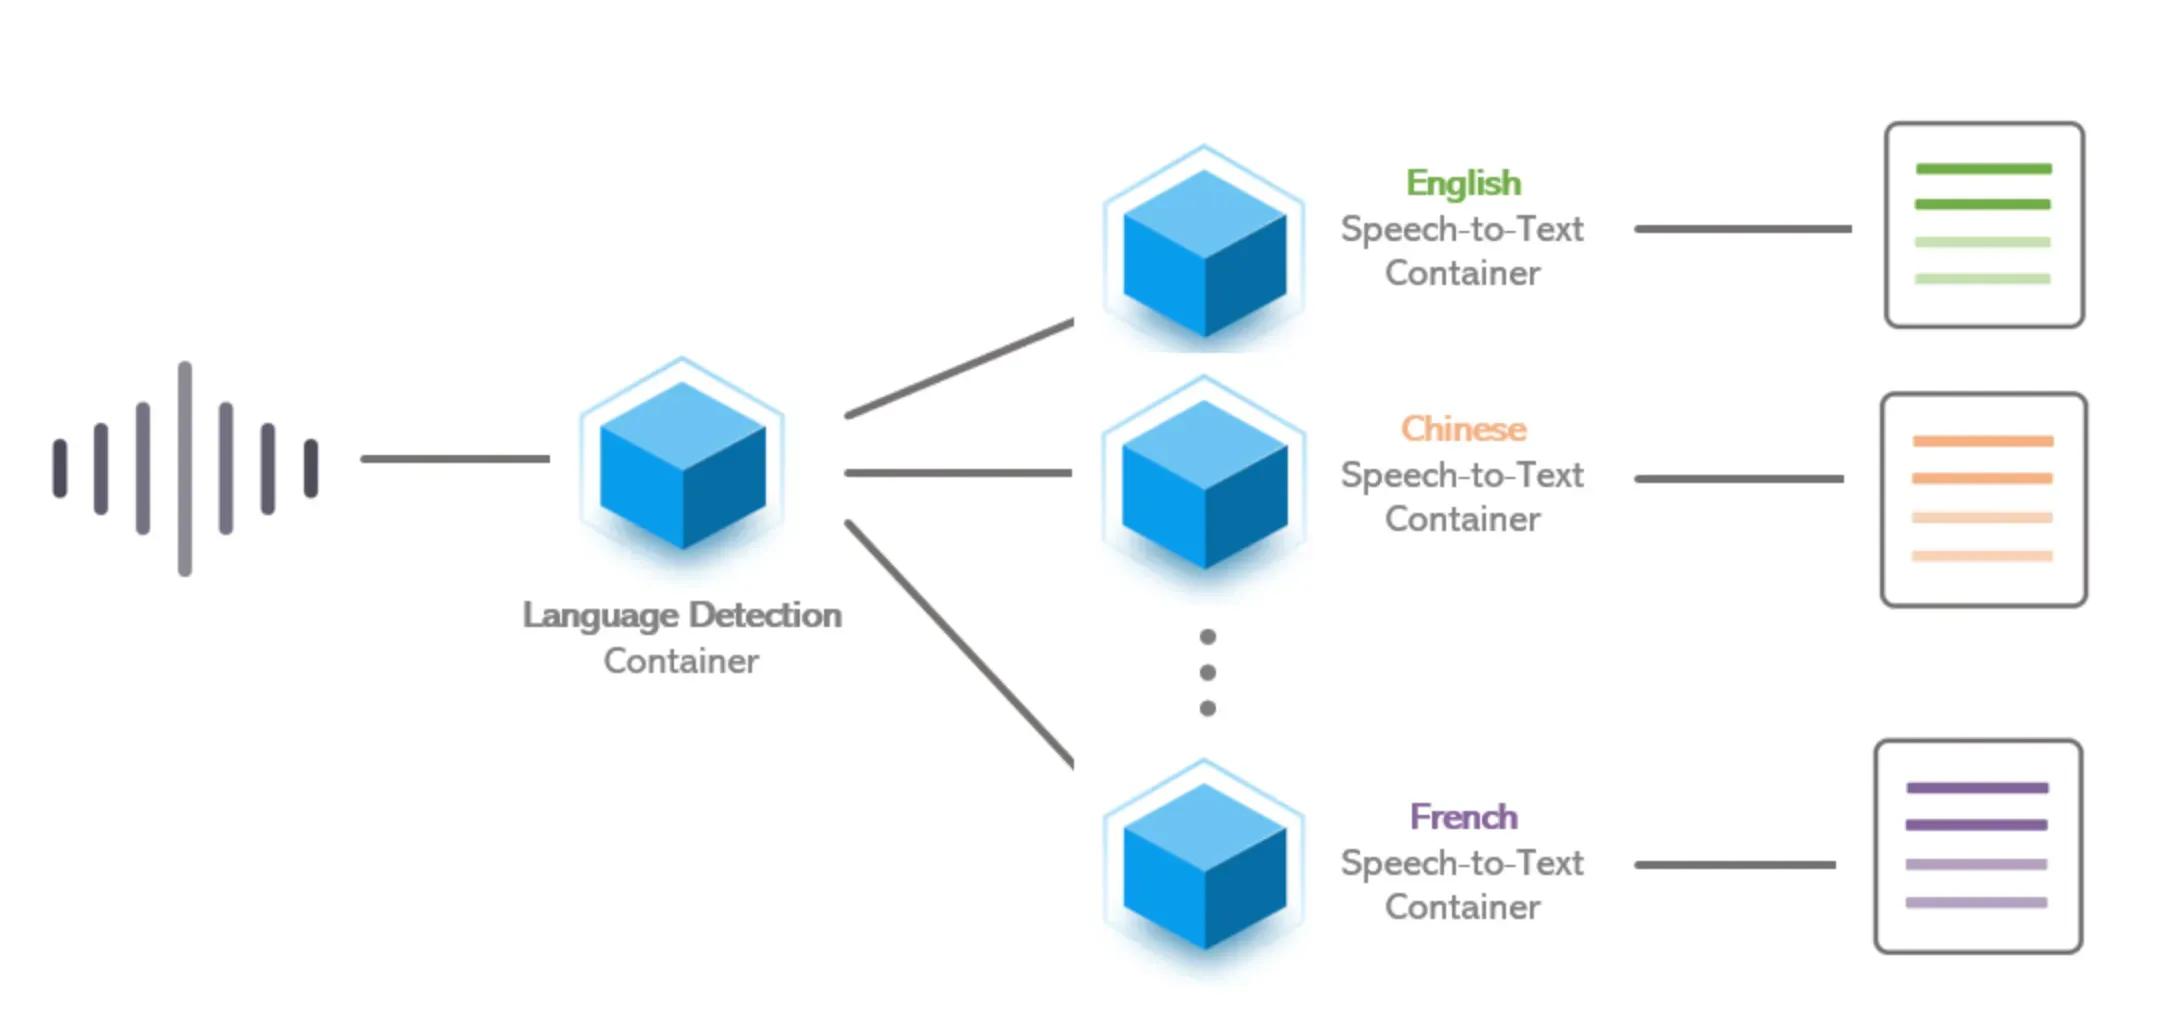 How does Language Detection Work?